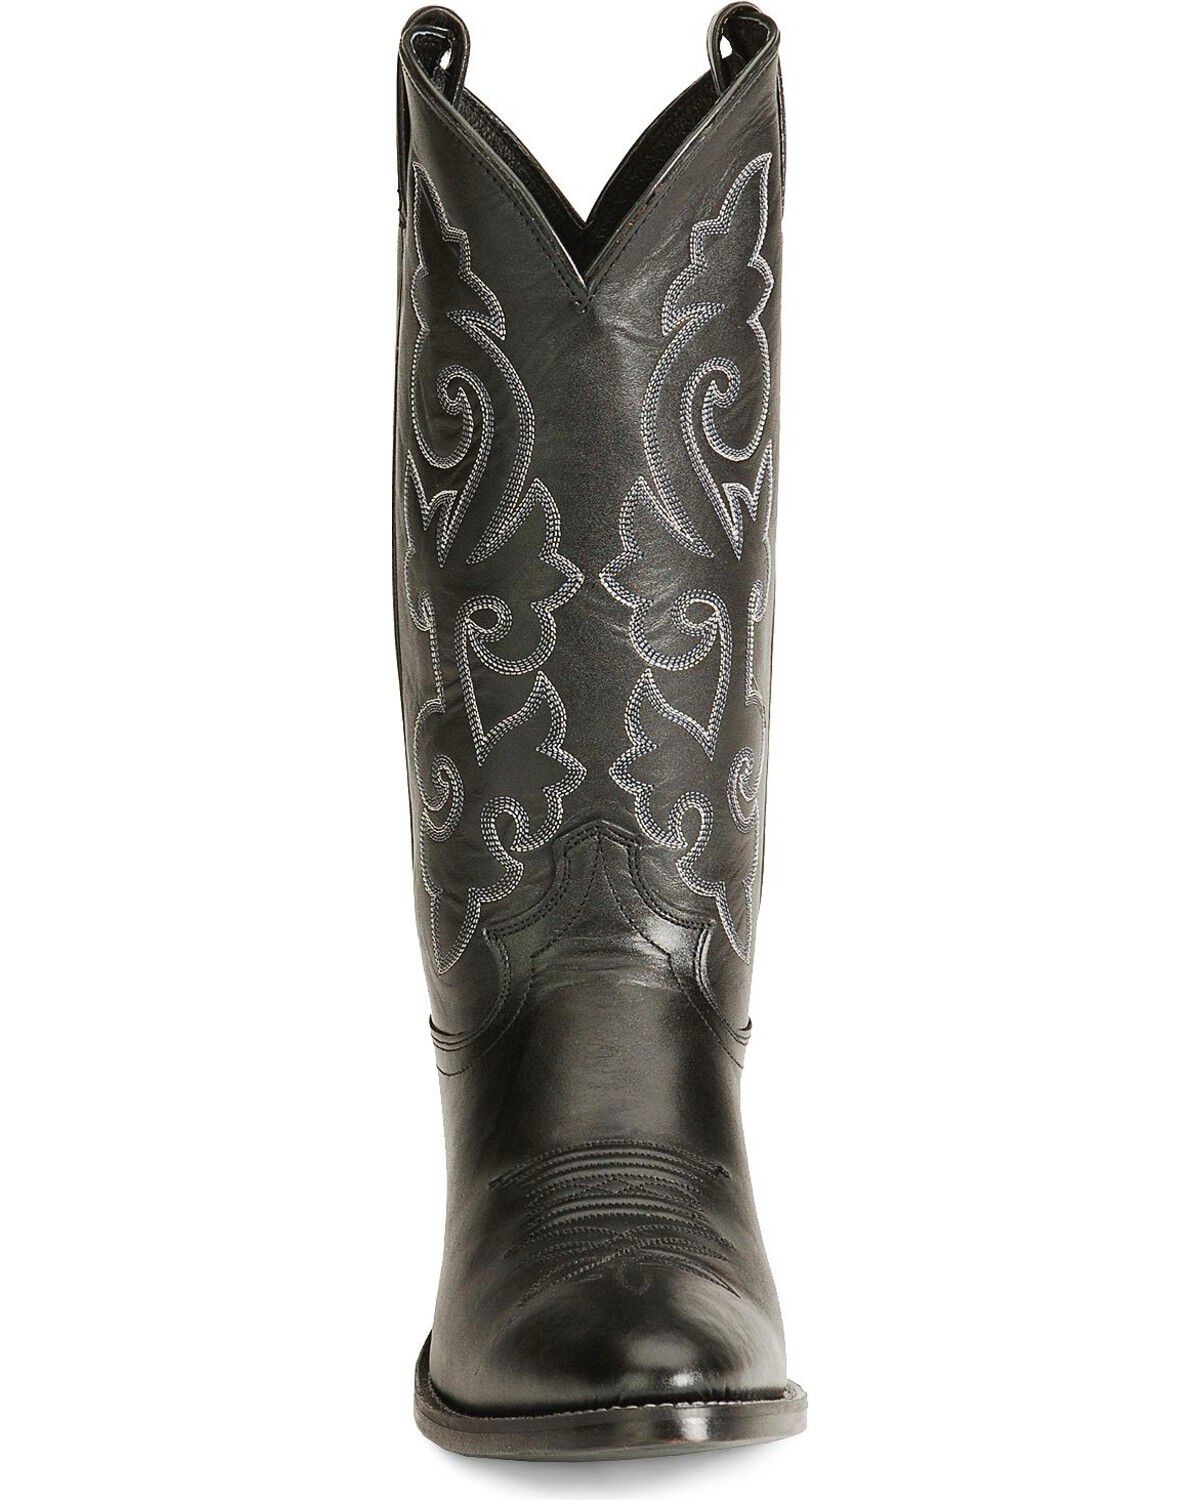 mens cowboy boots with narrow shaft